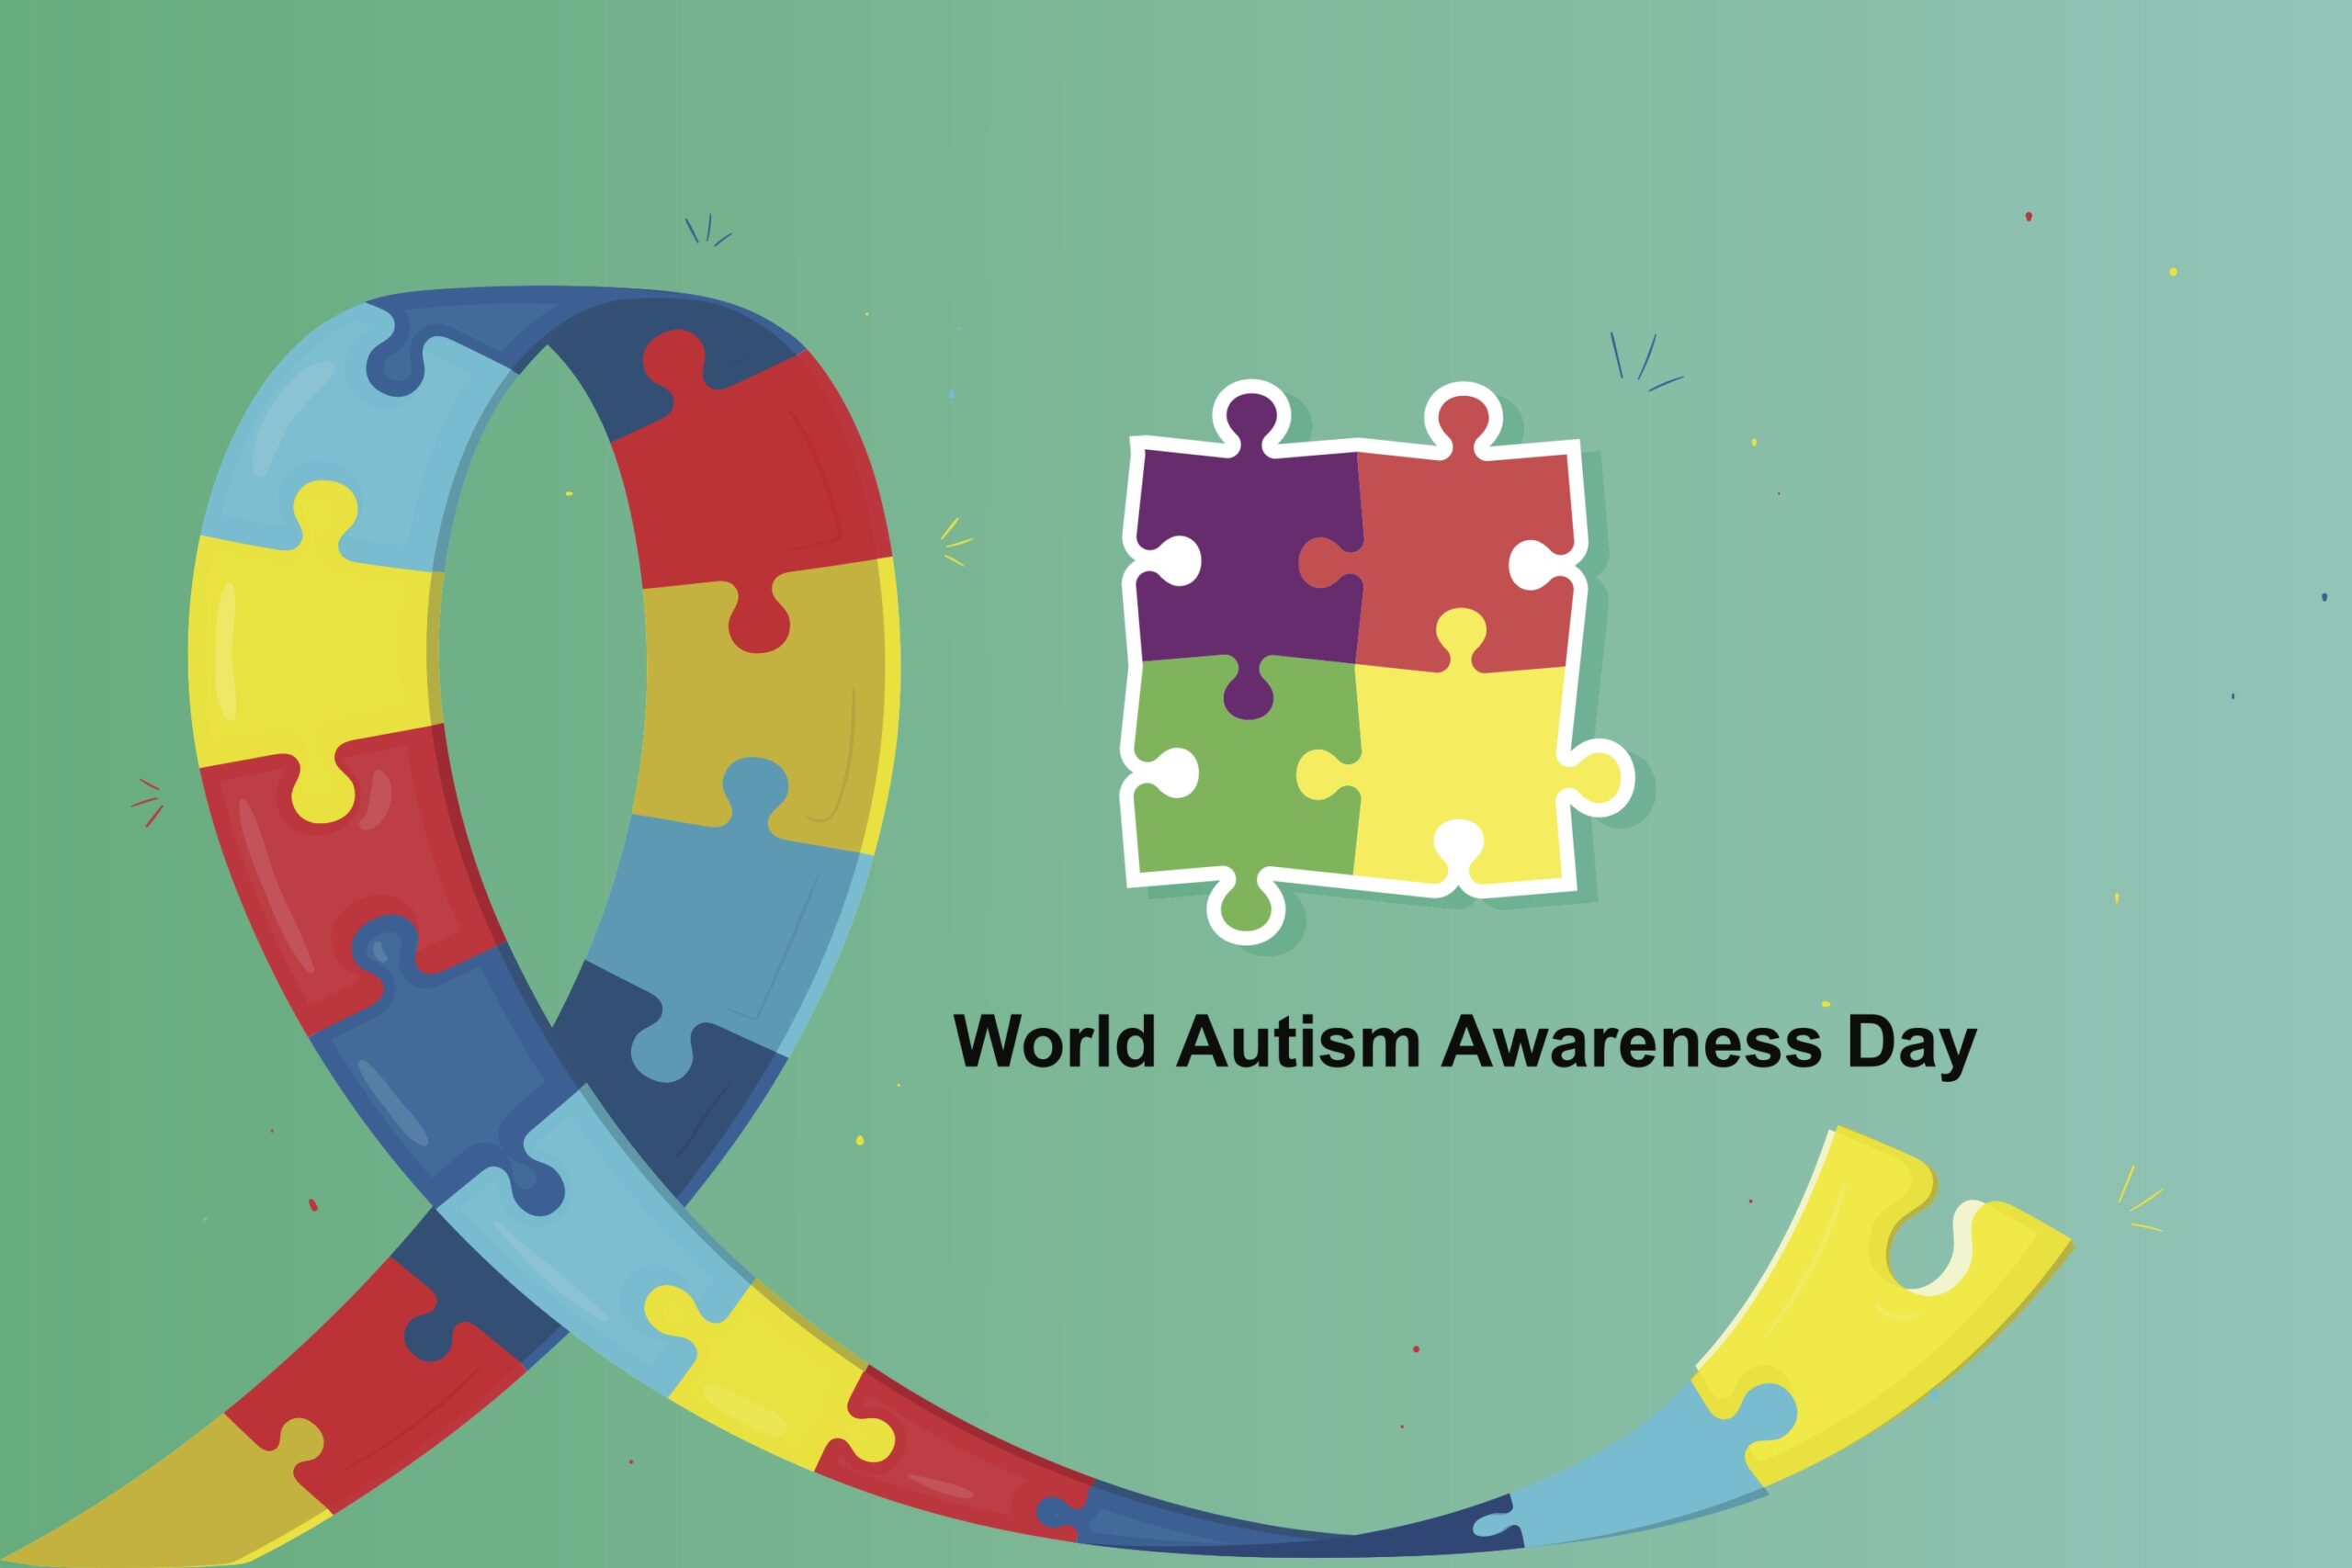 April 2nd is World Autism Awareness Day! If you are curious about what you can do, check out these 7 meaningful ideas!